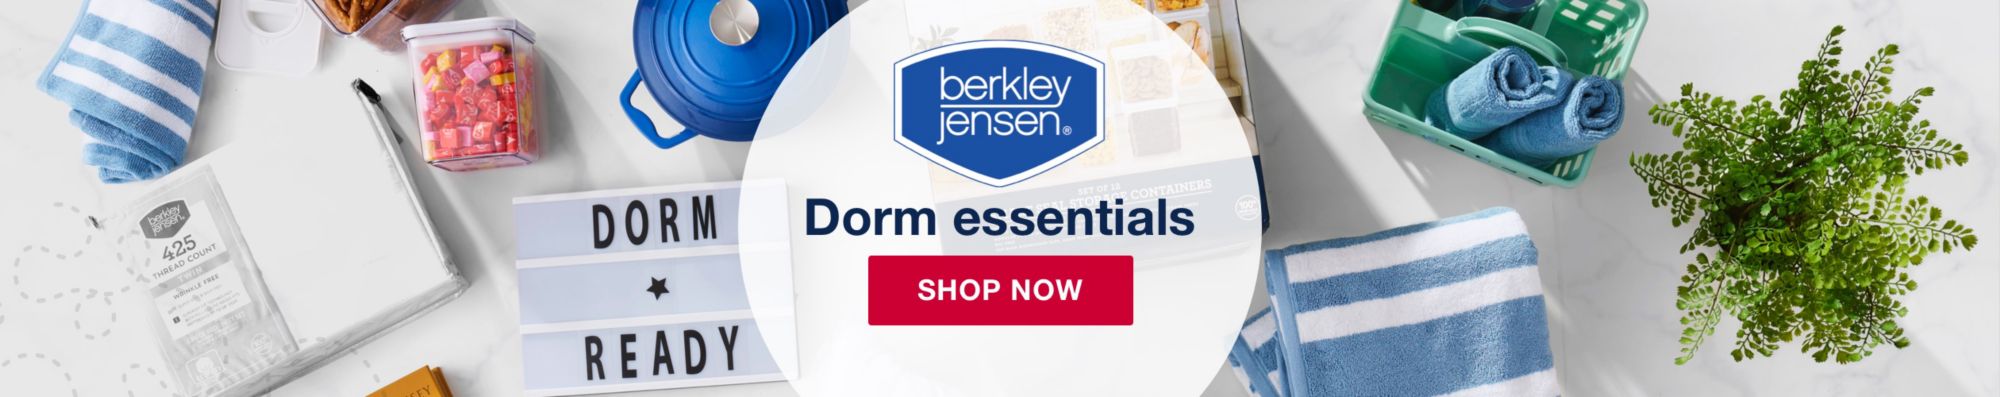 Dorm essentials. click to shop now. Image shows organization items, towels, and bedsheets.